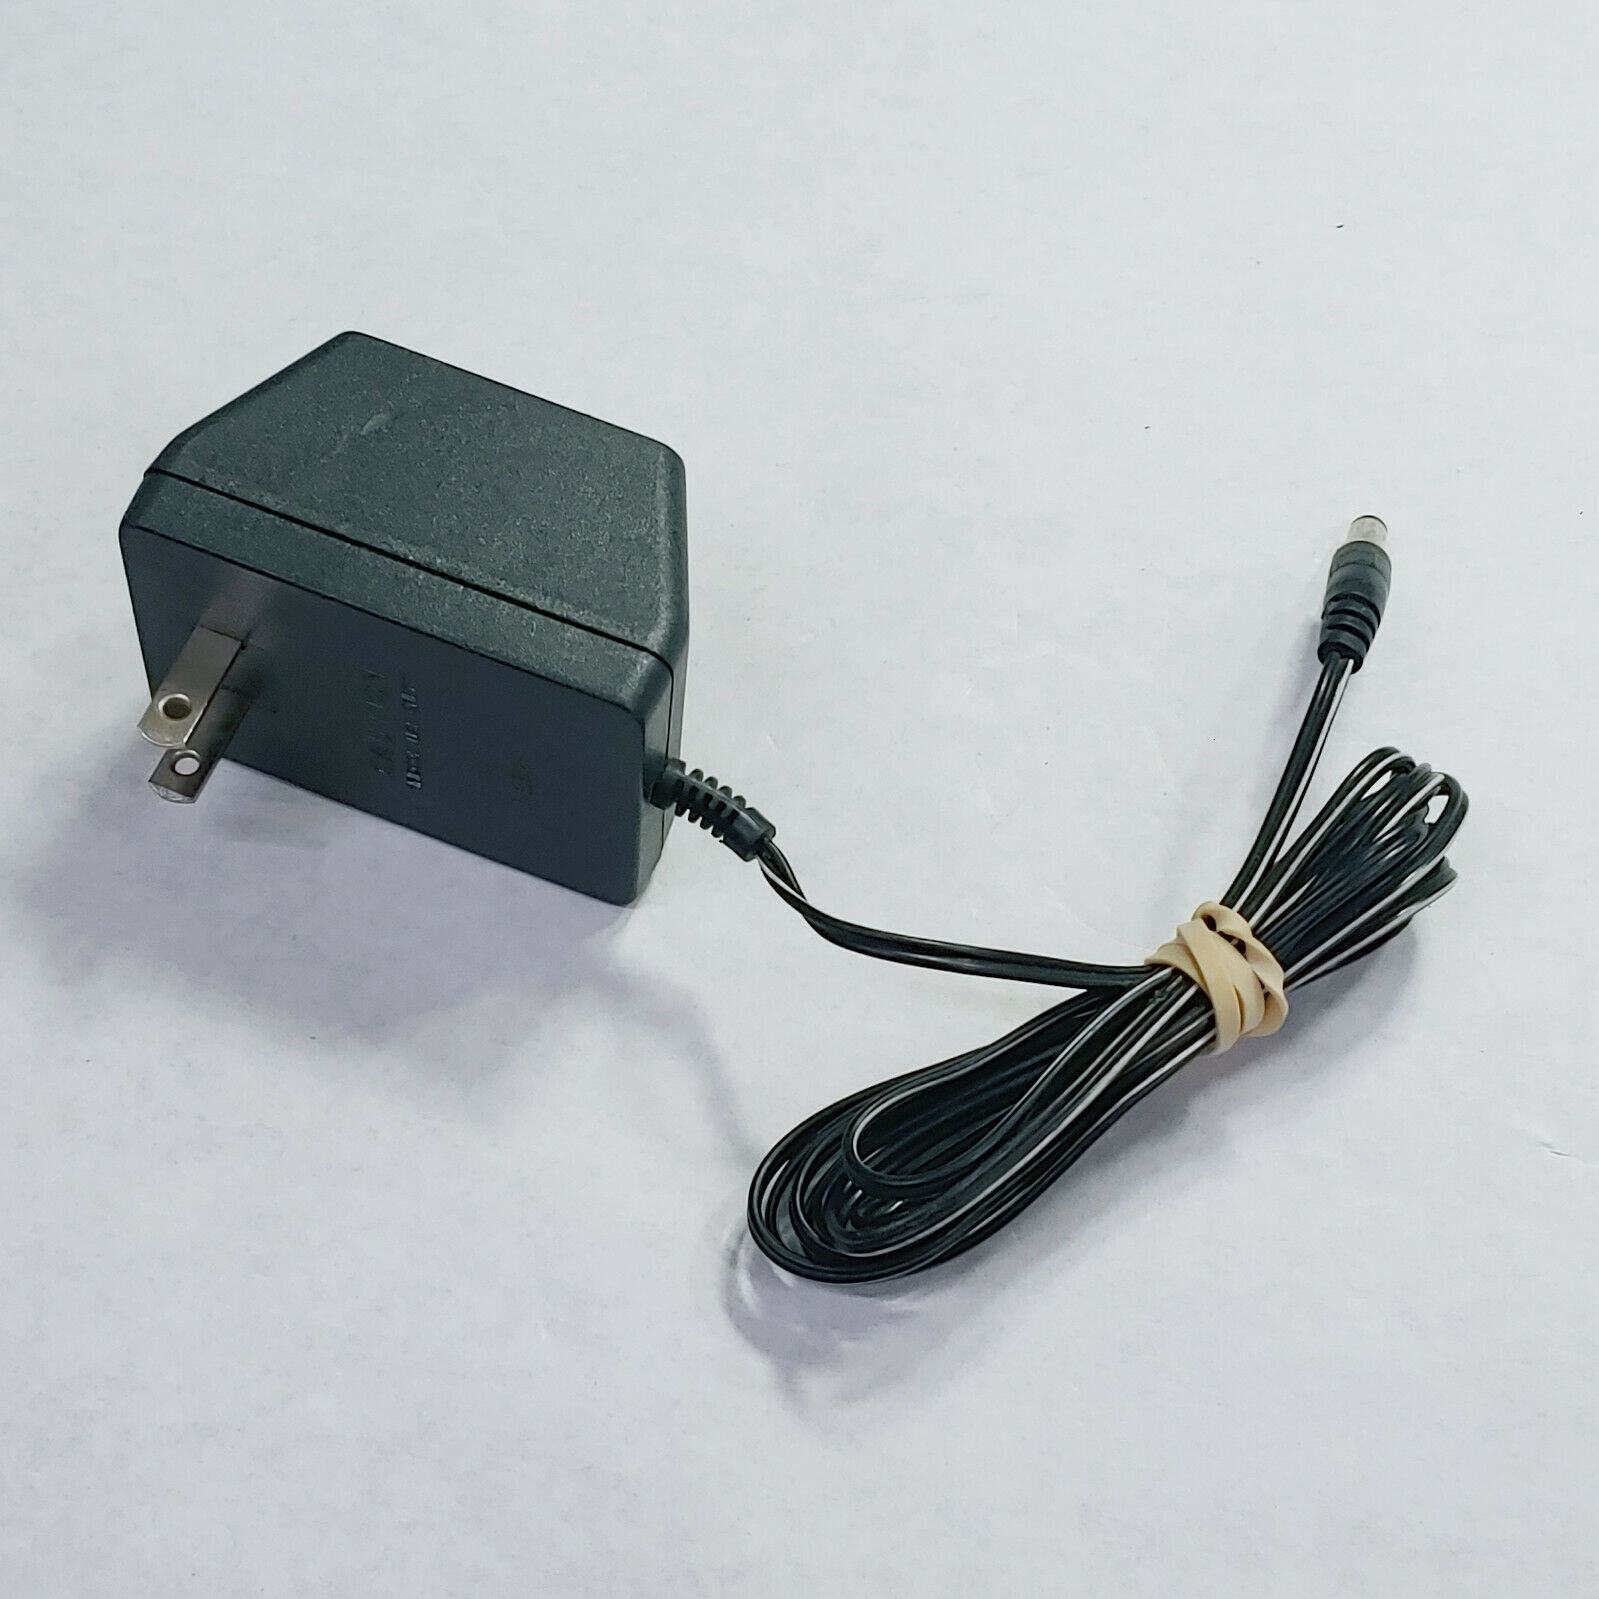 Leapster Leapfrog 690-10590 Toy Transformer AC Adapter Charger 13V 700ma Type: AC/AC Adapter Connection Split/Duplicat